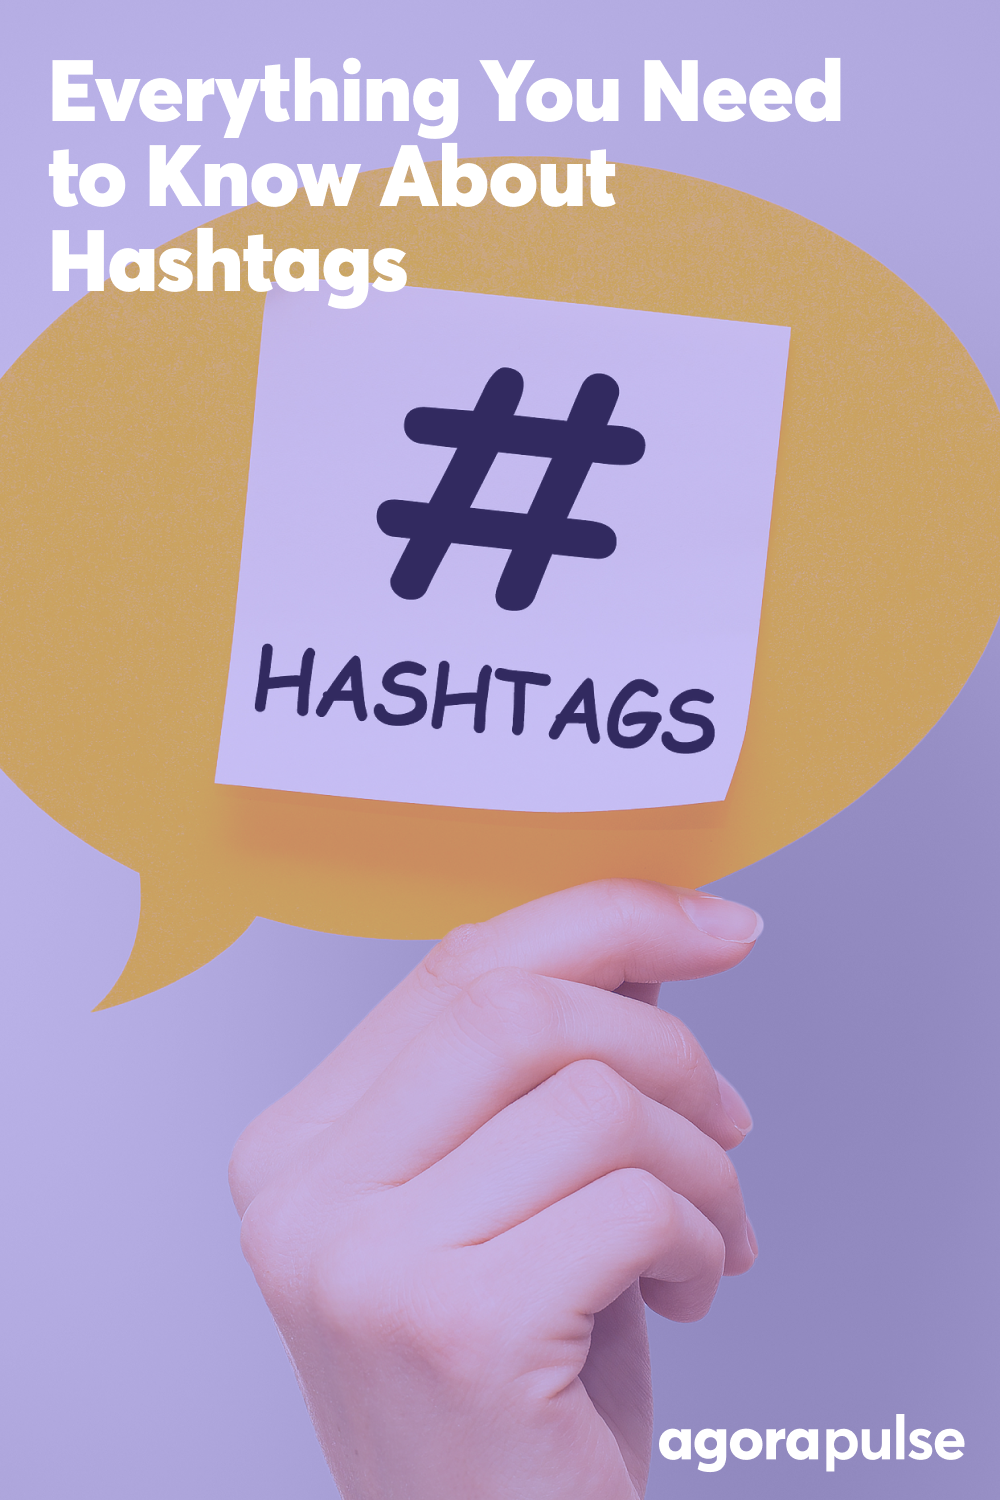 Hashtag Help: Your Complete Guide to Instagram Hashtags